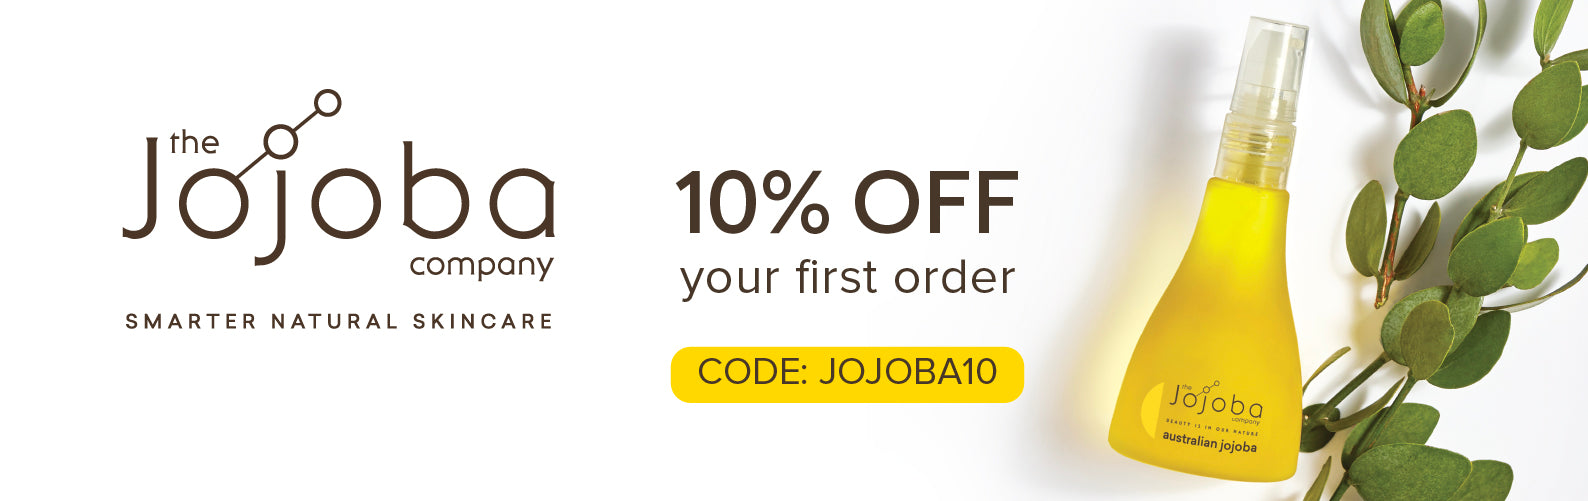 the jojoba company 10% off your first order bella scoop